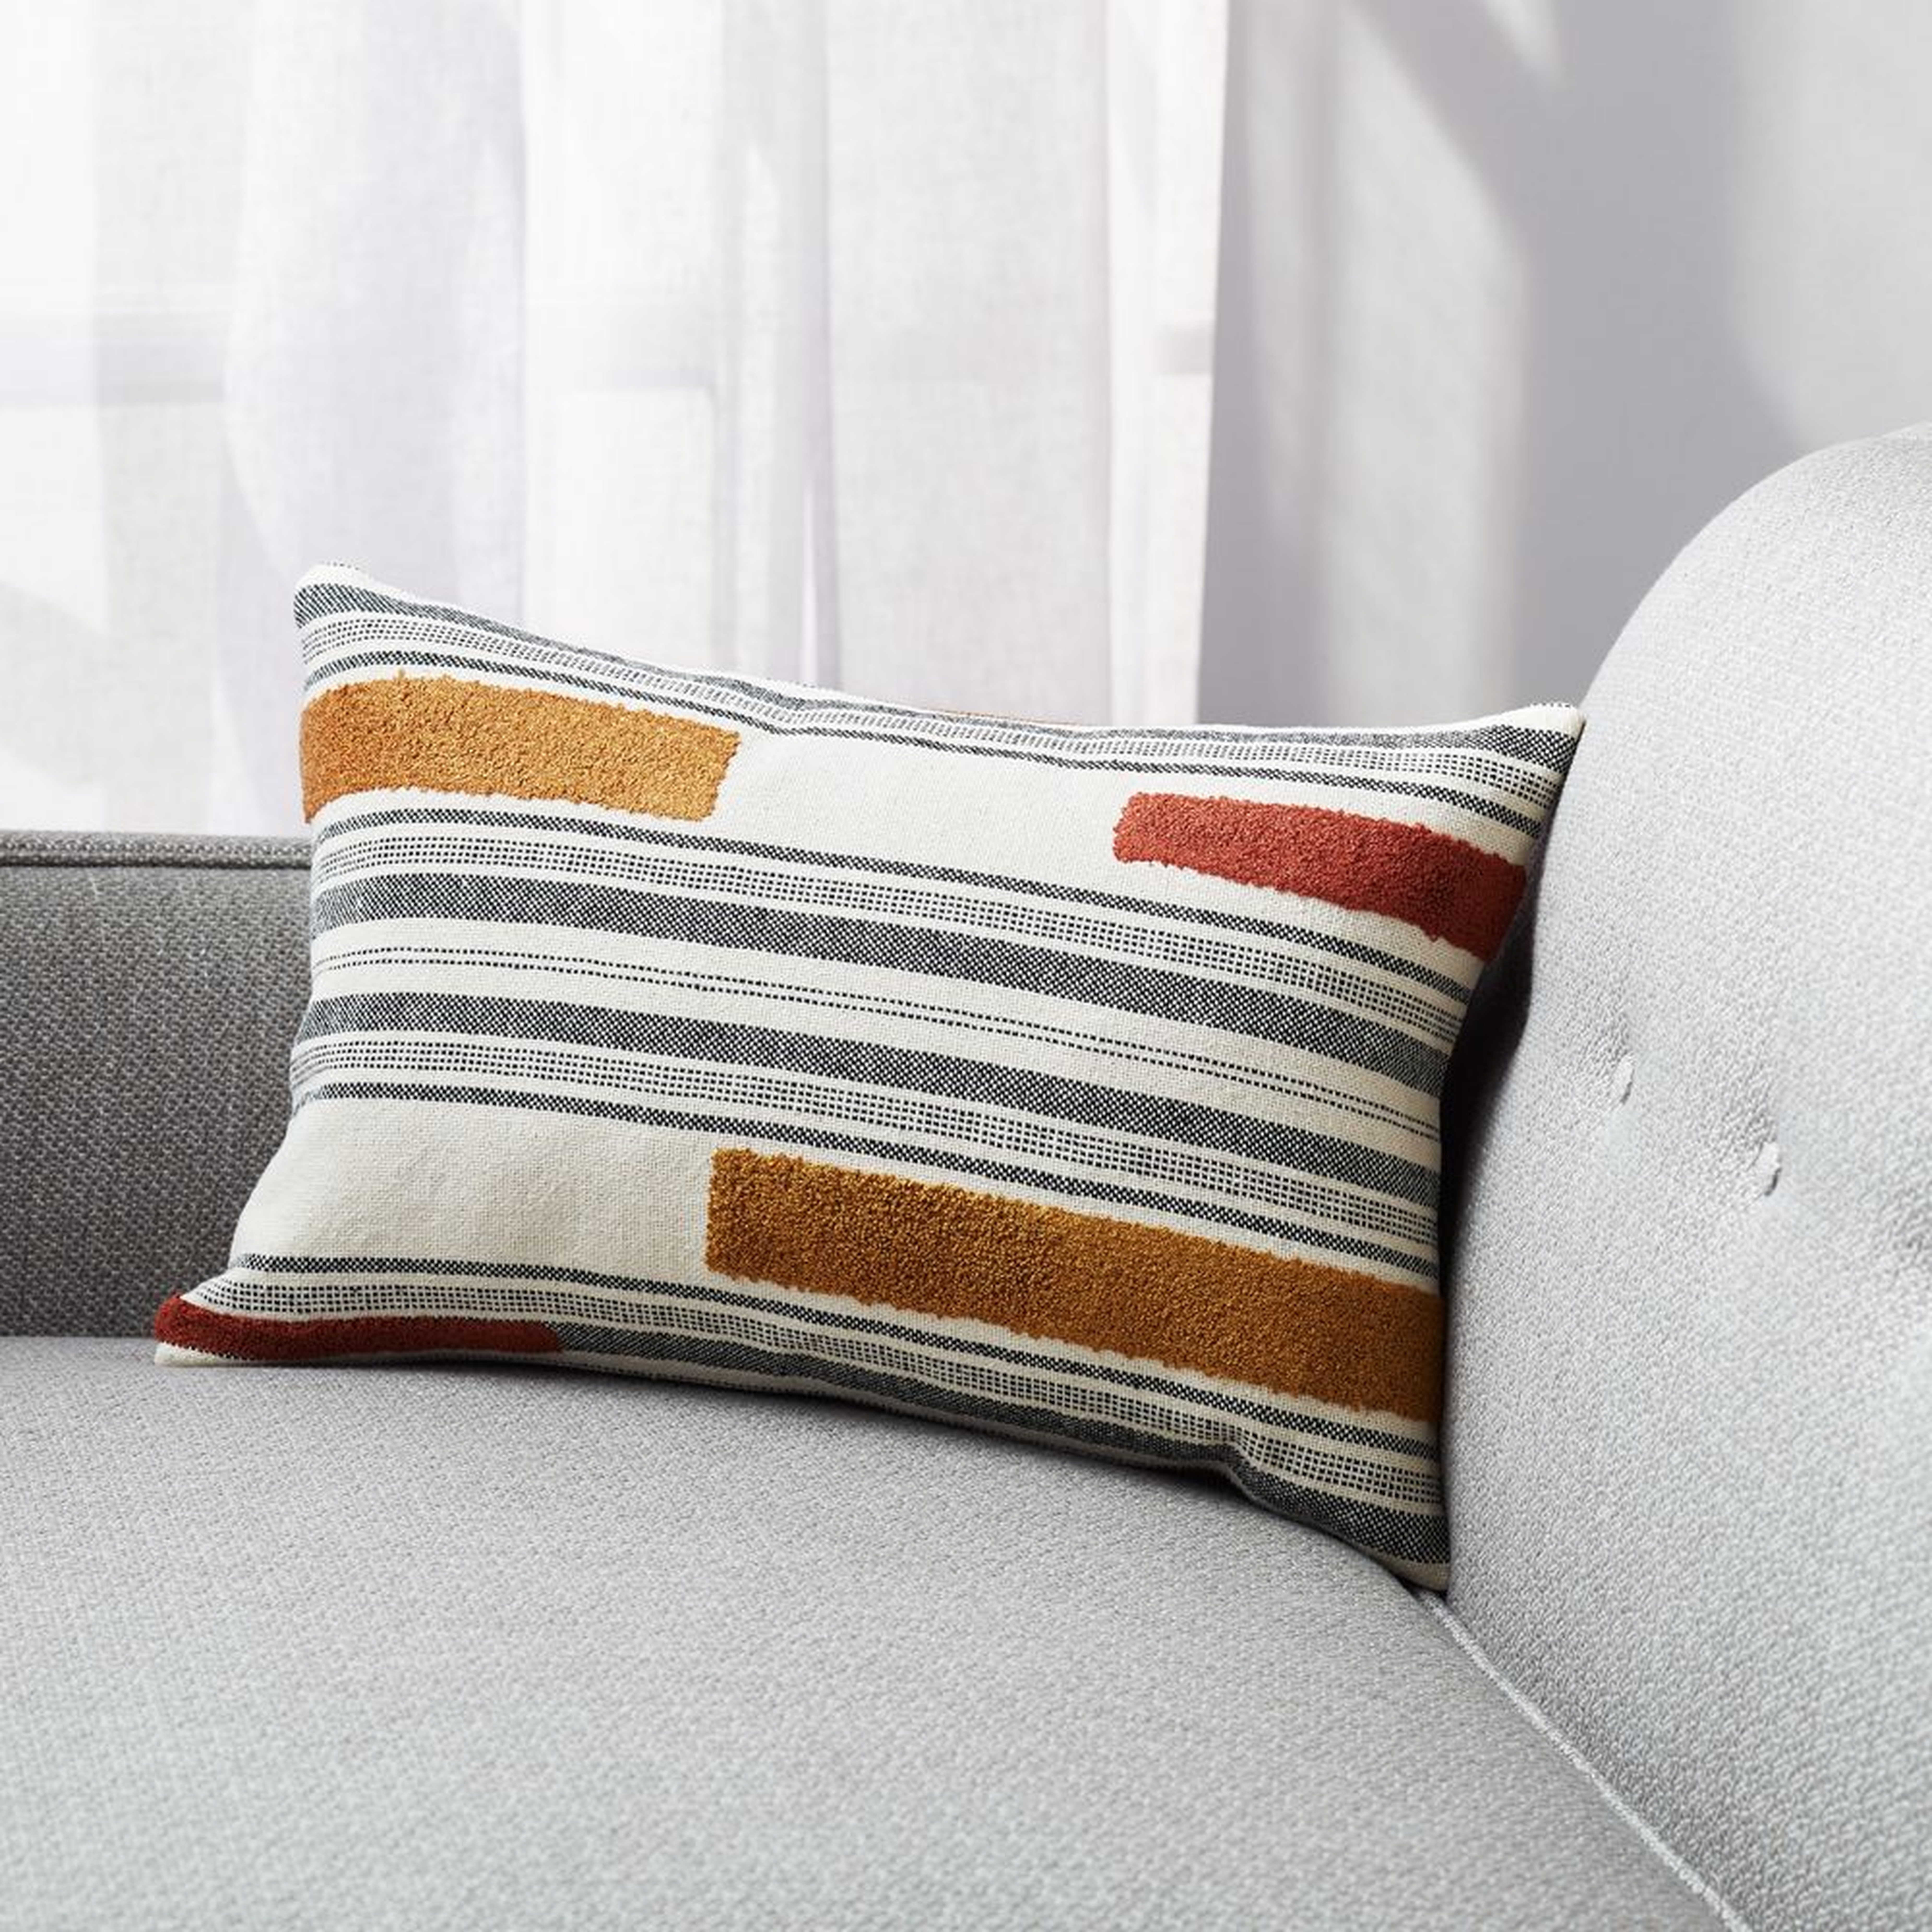 Reims Stripe Pillow with Feather-Down Insert 18"x12" - Crate and Barrel